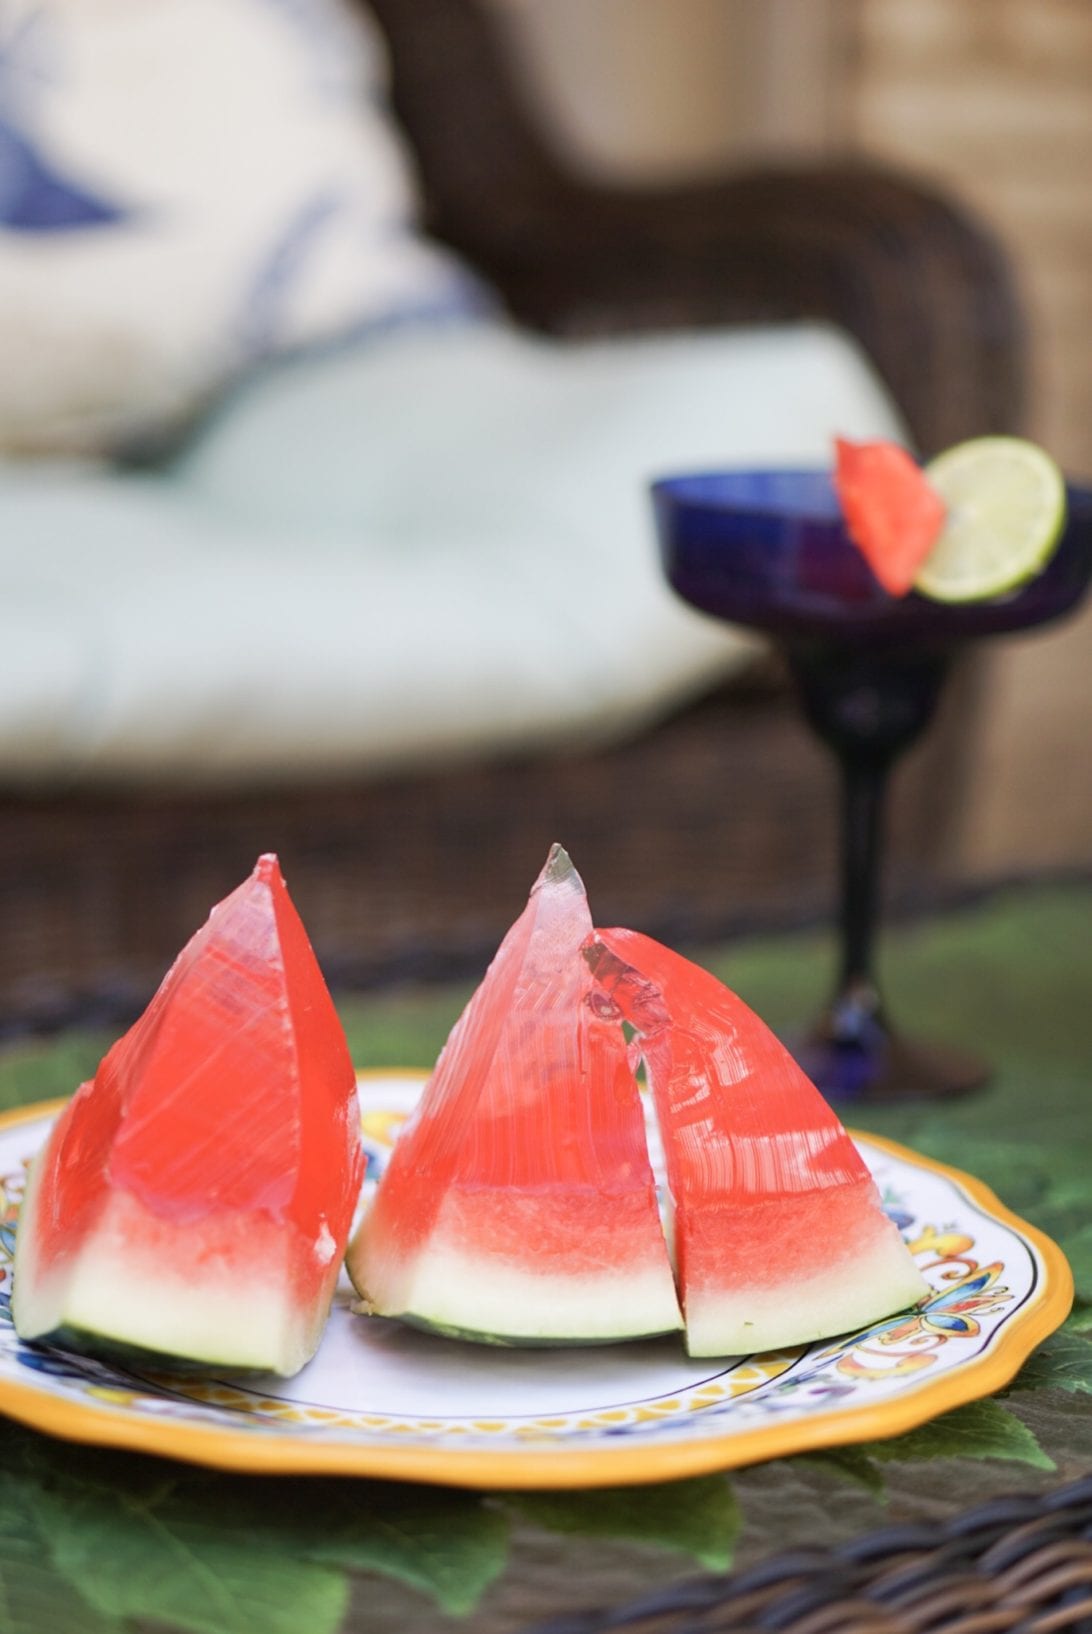 Easy to Make Watermelon Drinks for Summer, watermelon drinks, watermelon sangria, watermelon jello shots, alcoholic drinks, party drinks, summer drinks, beverages, memorial day, jello shots, watermelon